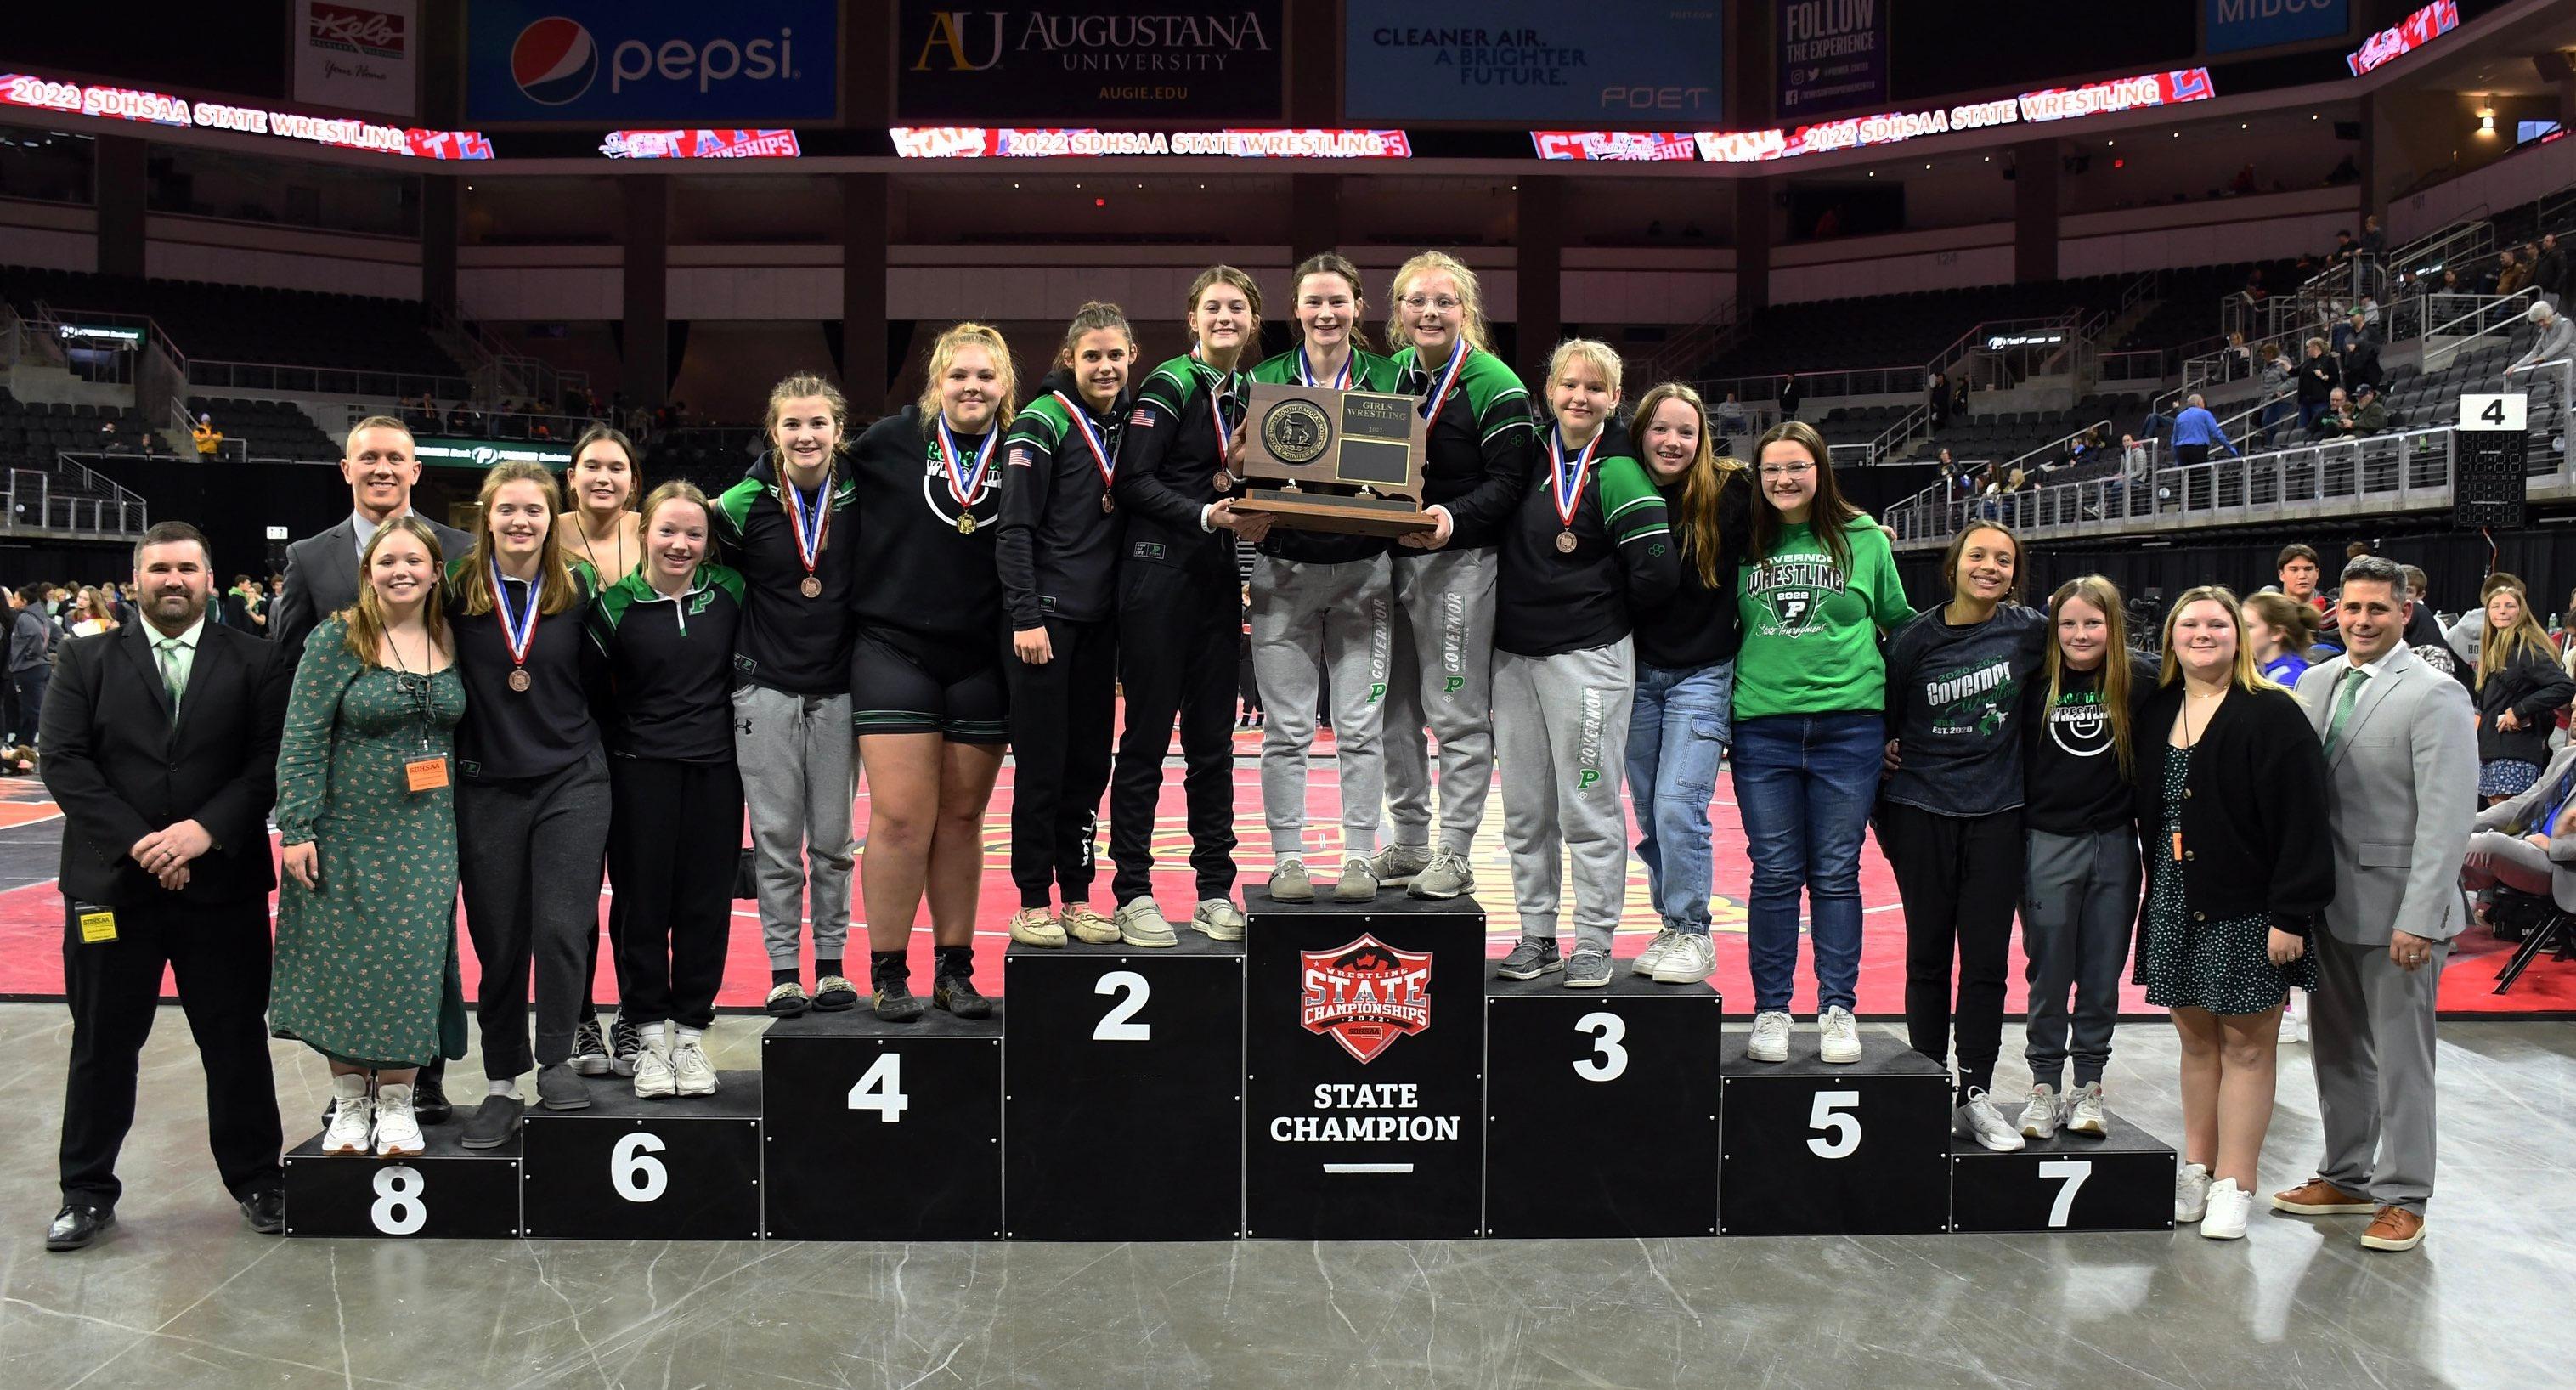 Pierre Claims First Girls Wrestling Team Title In SD History